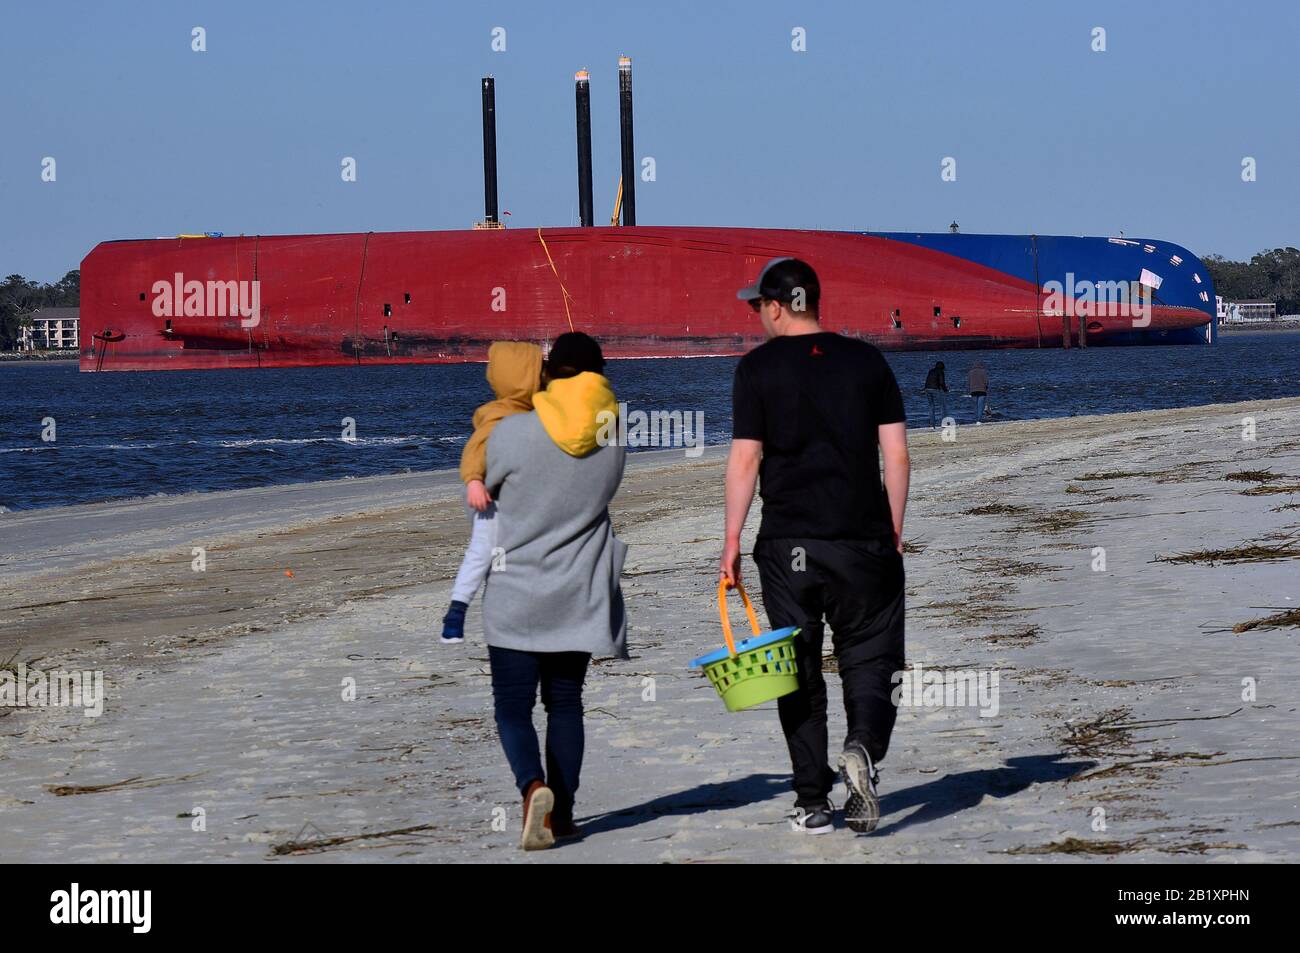 Jekyll Island, United States. 27th Feb, 2020. February 27, 2020 - Jekyll Island, Georgia, United States - People walk the beach near the Golden Ray cargo ship on February 27, 2020 in Jekyll Island, Georgia. In about a month, a salvage company will begin cutting the vessel into eight segments which can be lifted out of the water and removed by a barge. The vehicle carrier, loaded with 4200 new cars, capsized in St. Simons Island Sound on September 8, 2019 as it was leaving the Port of Brunswick. Credit: Paul Hennessy/Alamy Live News Stock Photo